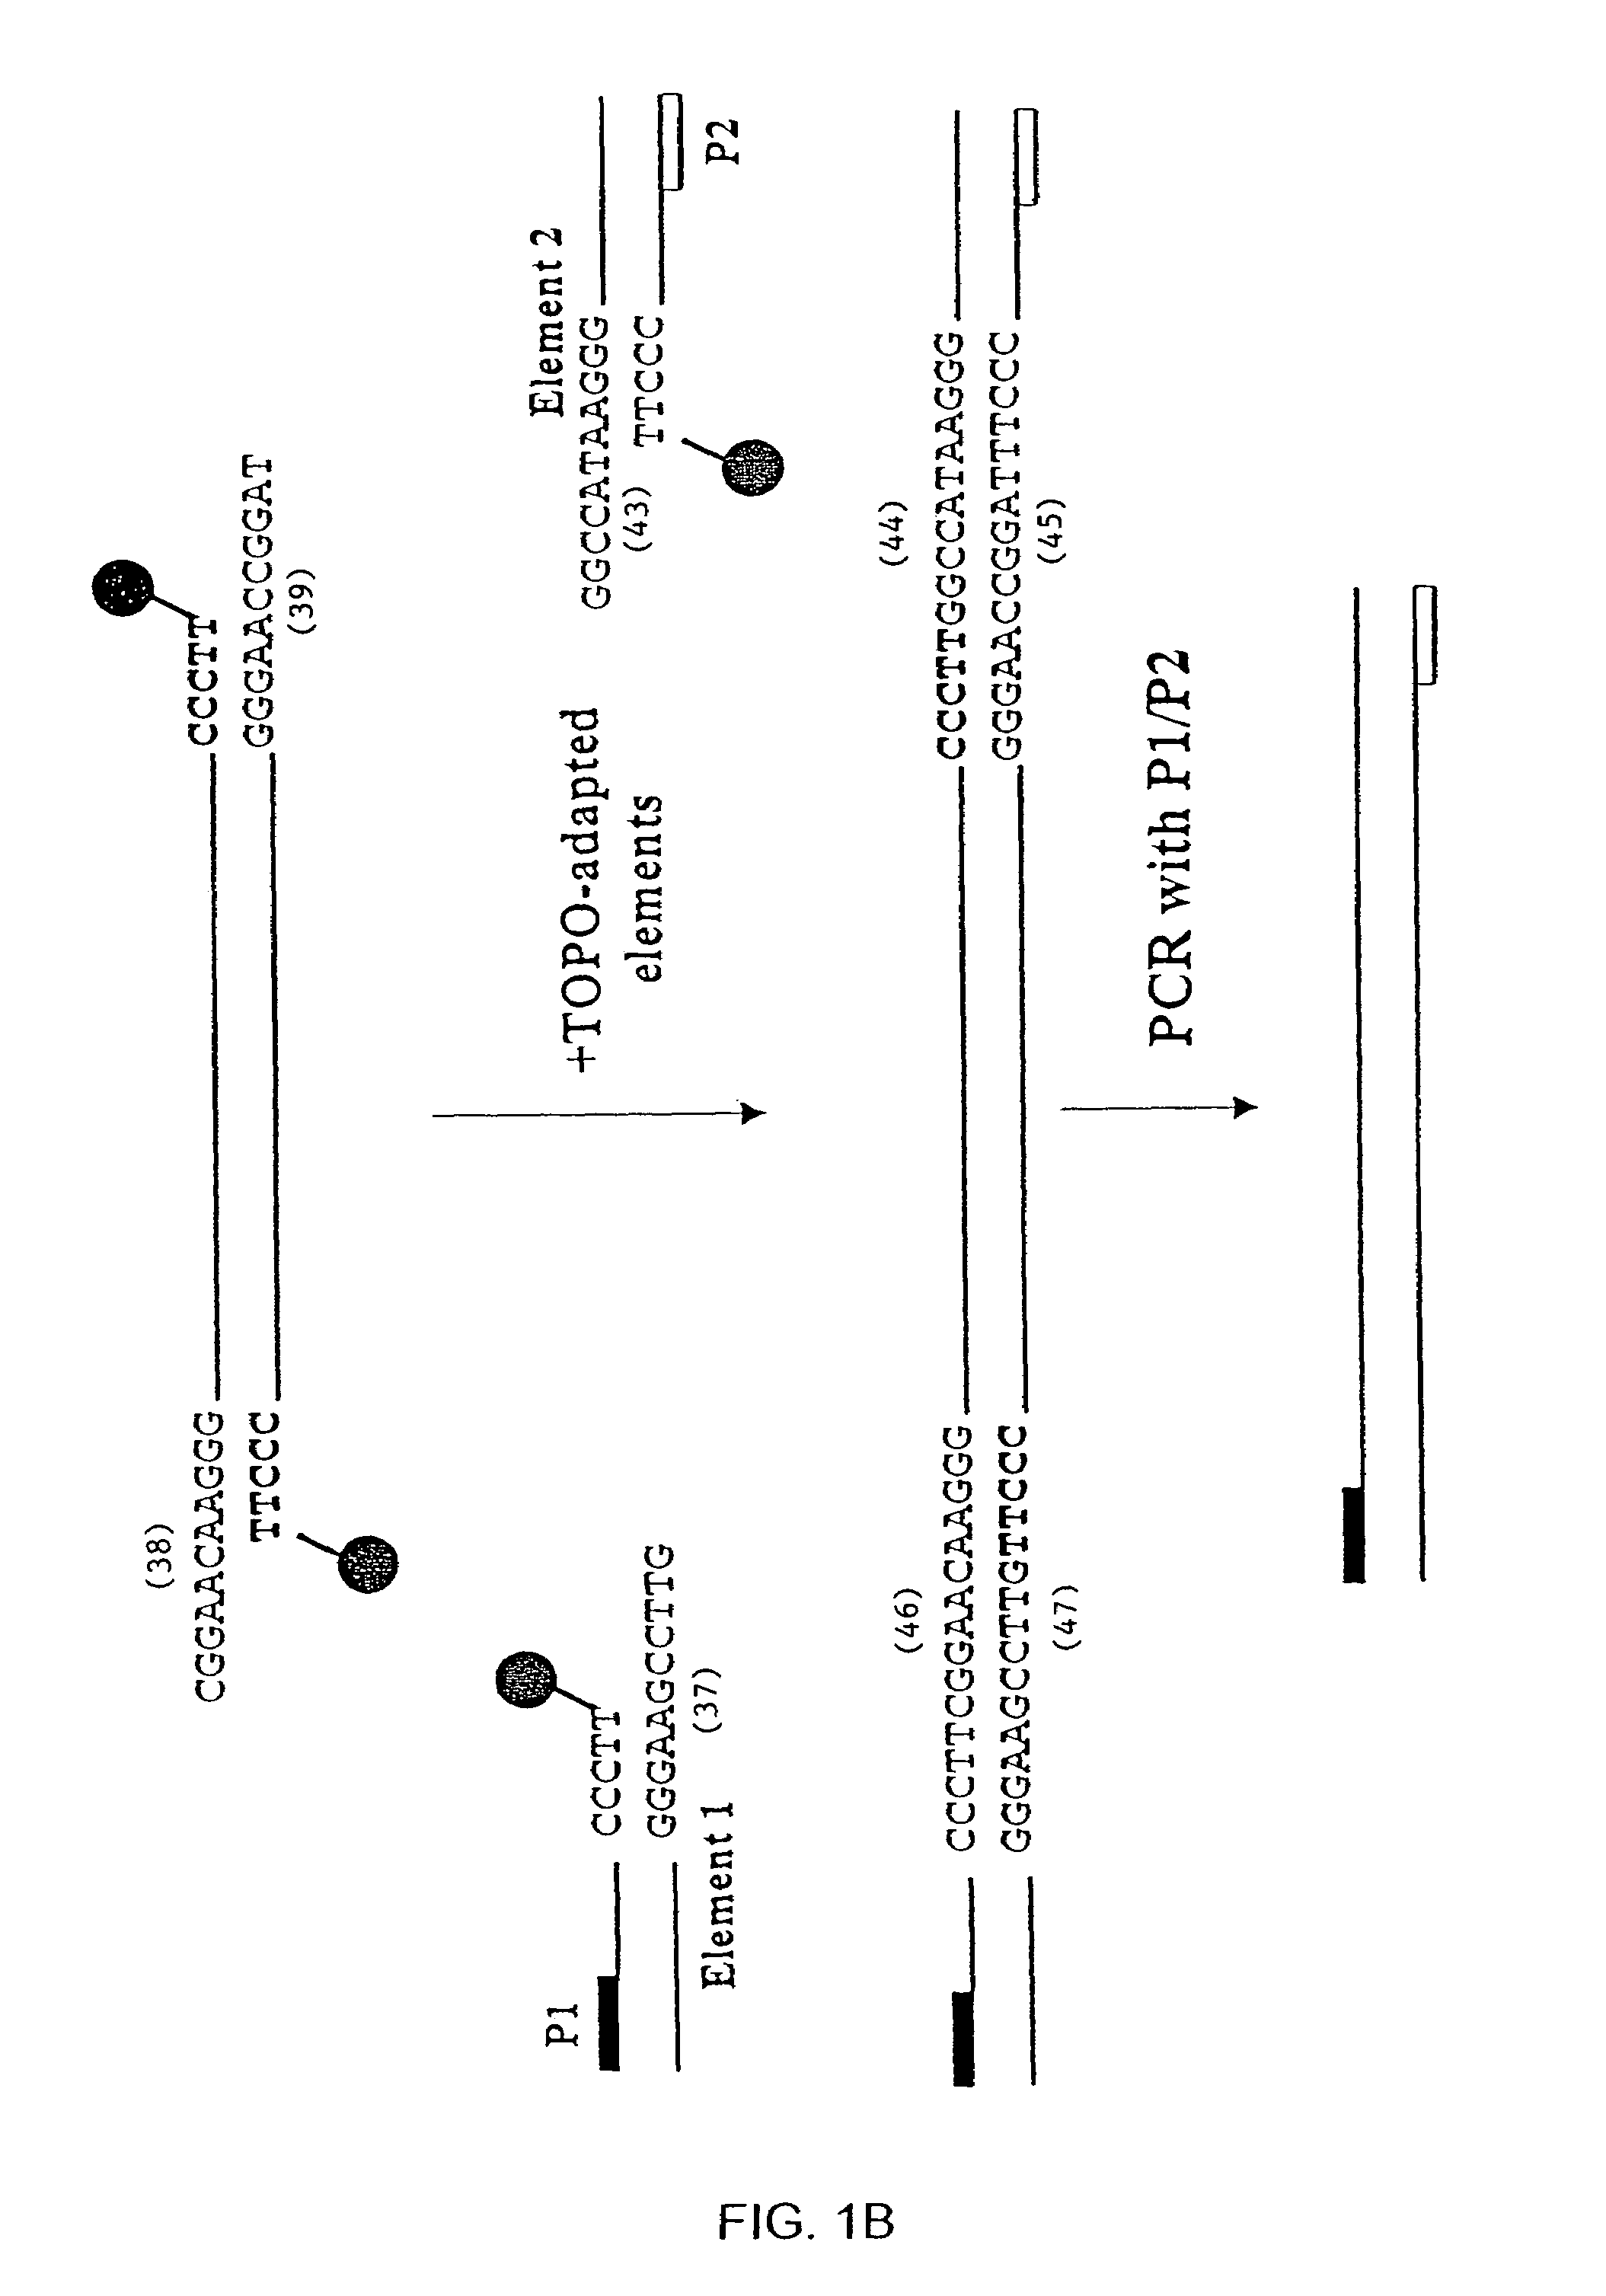 Compositions and methods for rapidly generating recombinant nucleic acid molecules